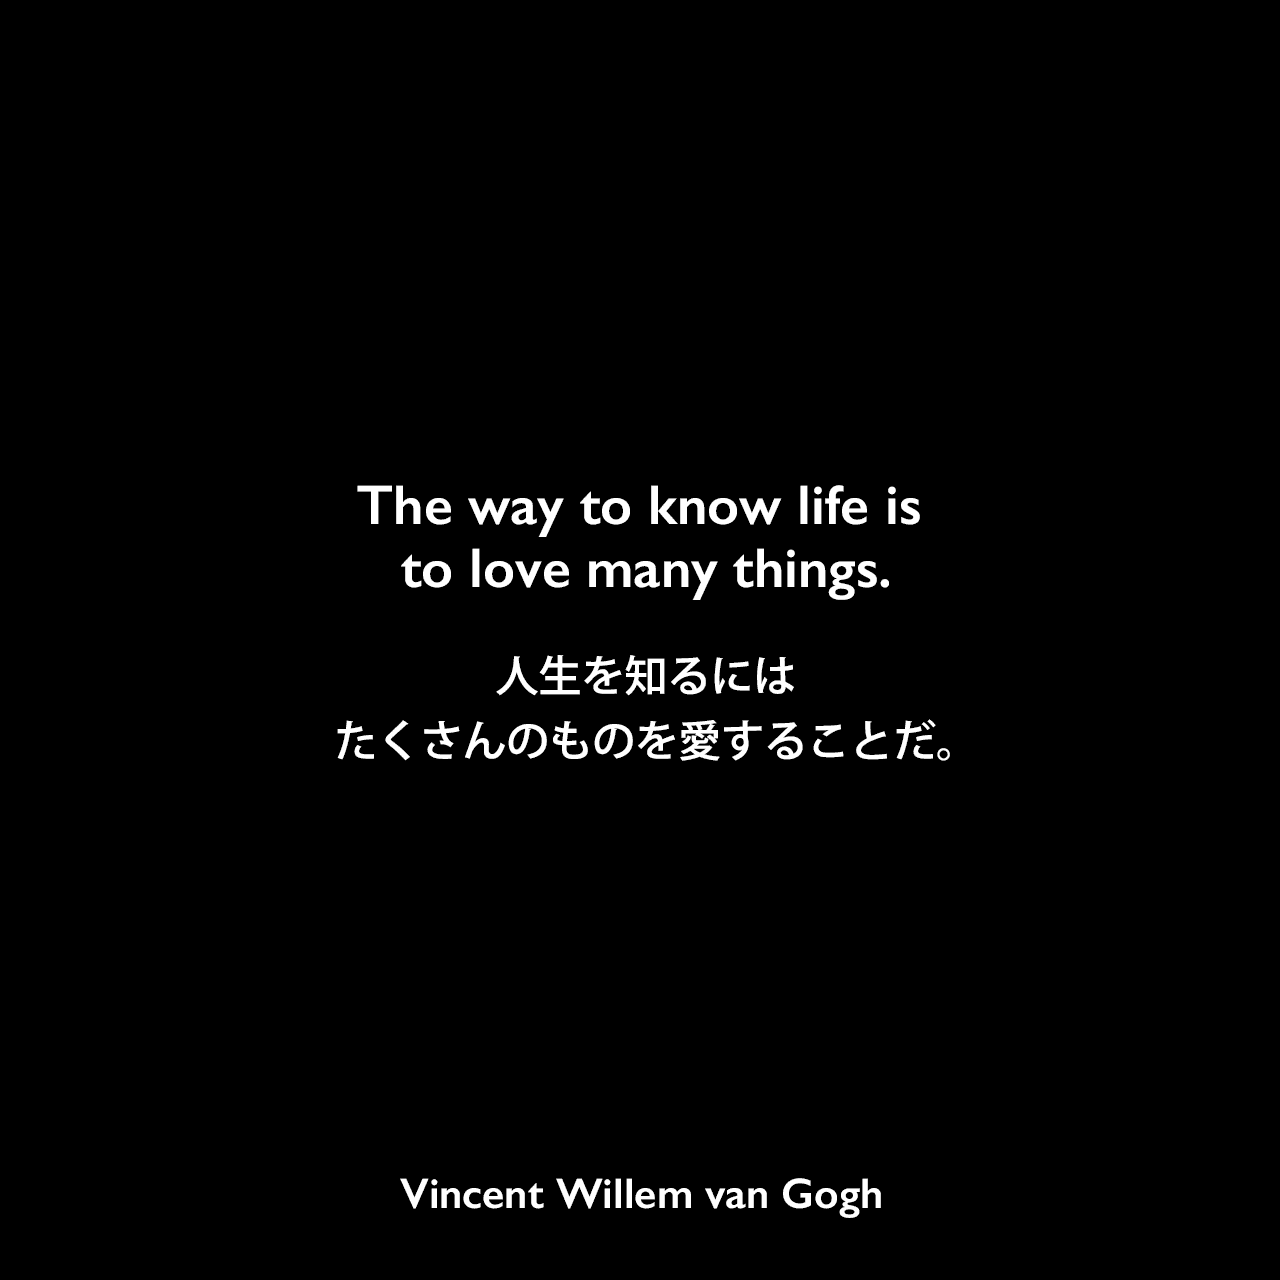 The way to know life is to love many things.人生を知るには、たくさんのものを愛することだ。Vincent Willem van Gogh